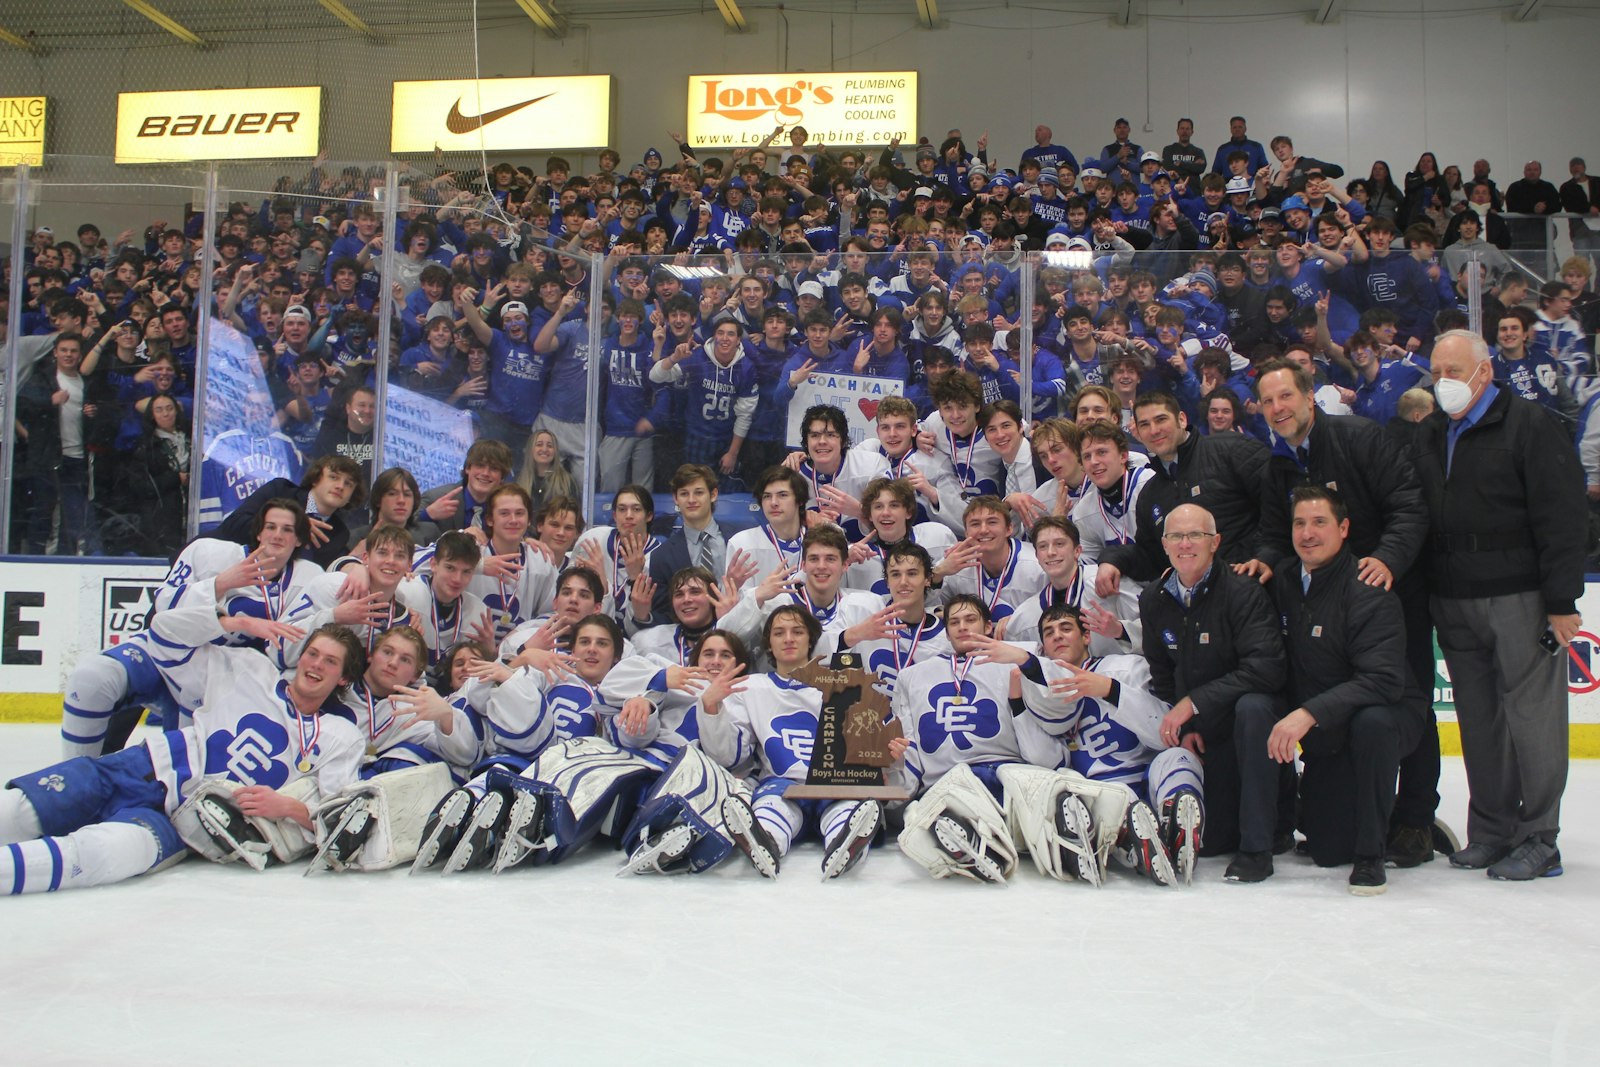 In what seems to be an annual tradition, Catholic Central hockey players gather with the state championship trophy in front of their fan section at Plymouth’s U.S.A. Hockey Arena. The Shamrocks downed Brighton, 5-1.